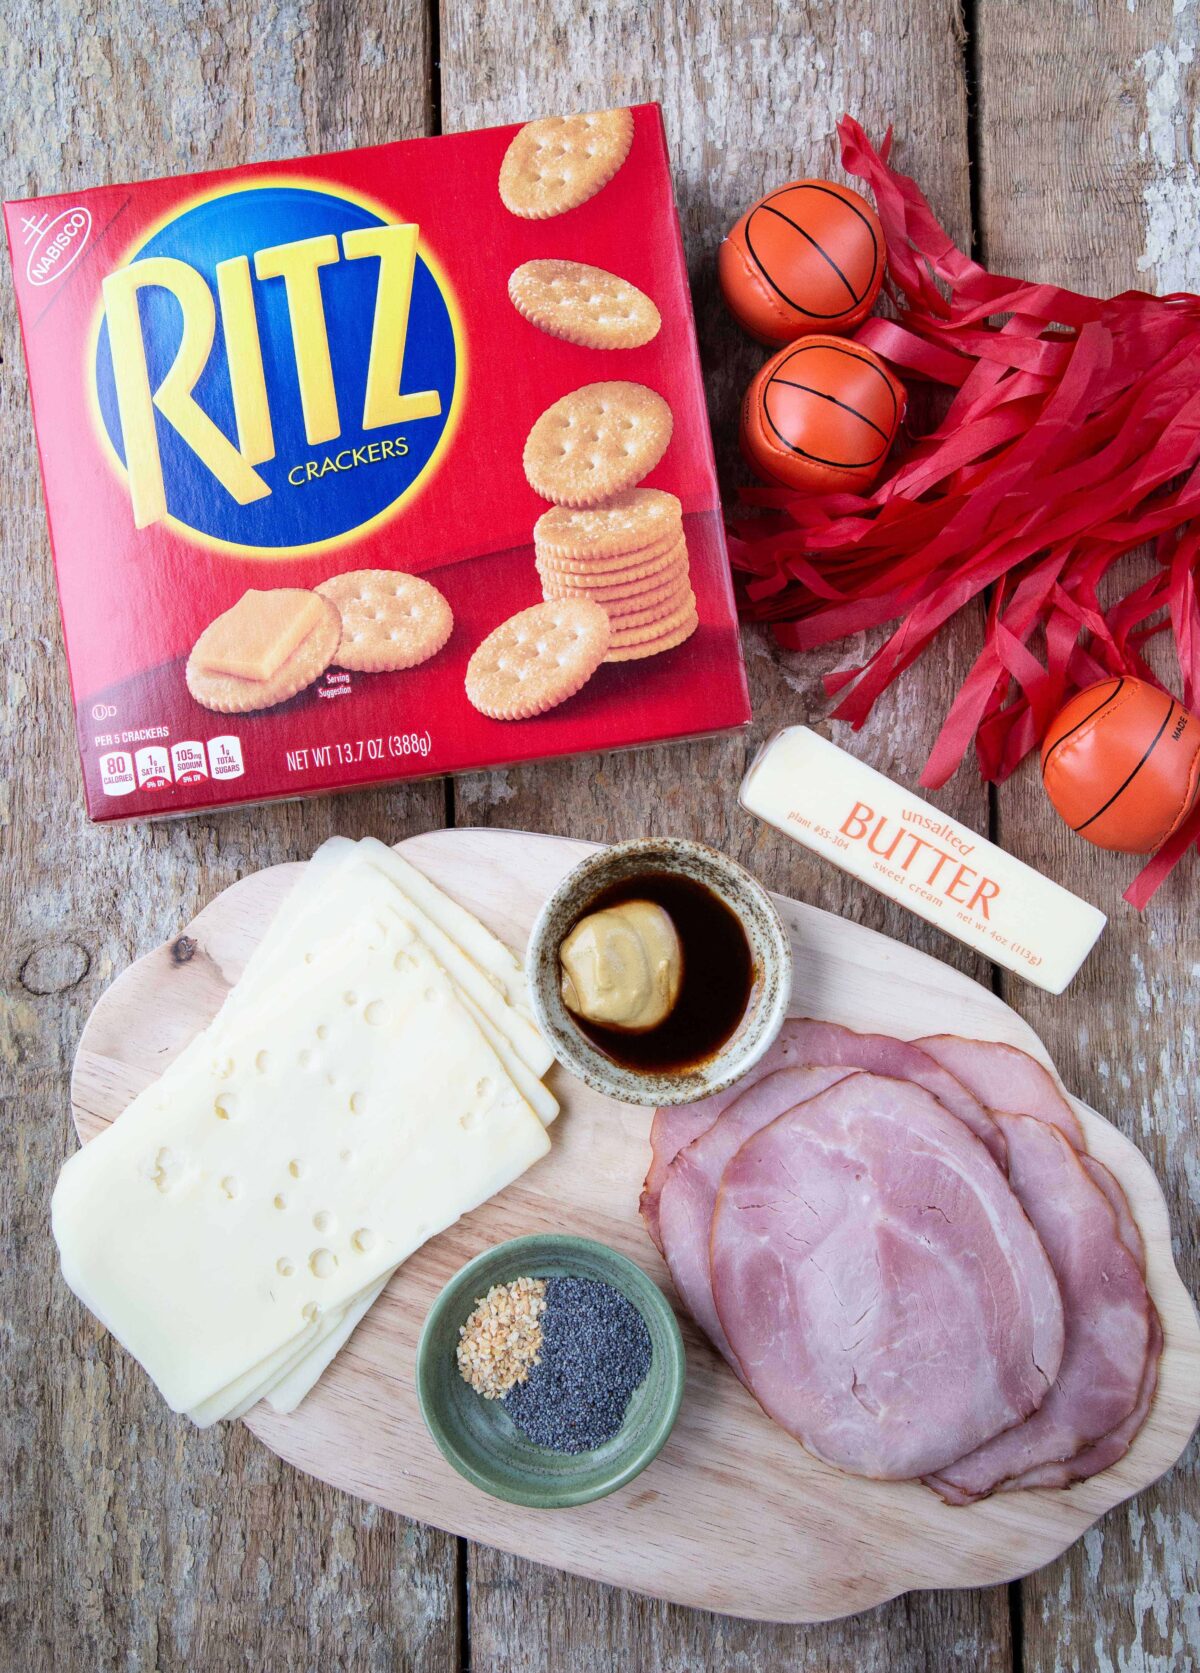 Ingredients for Ritz Crackers Party Sandwiches on a wooden table.